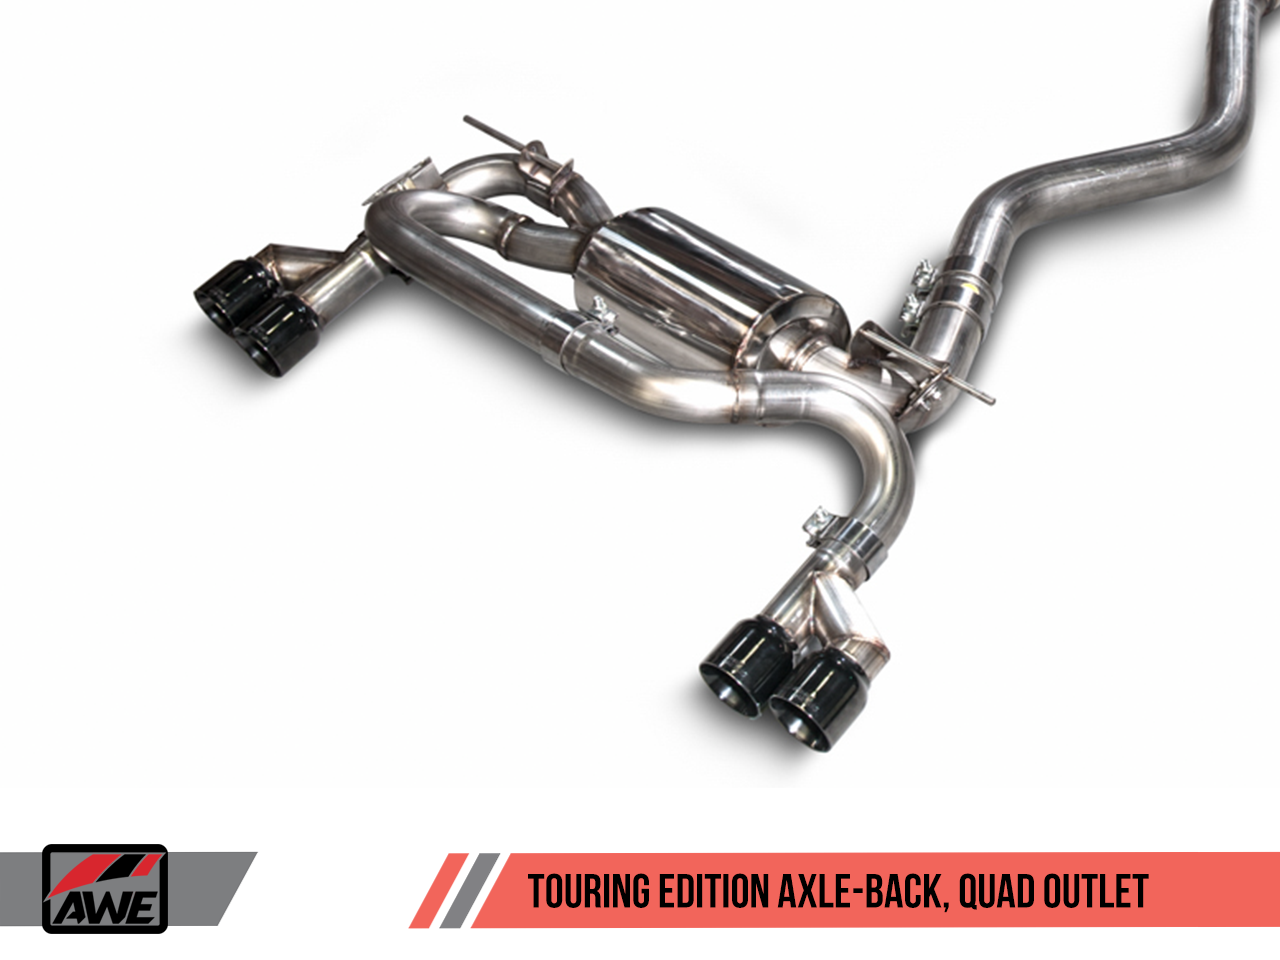 AWE Touring Edition Axle-back Exhaust, Quad Outlet for BMW F3X N20/N26 328i/428i - Diamond Black Tips (80mm)